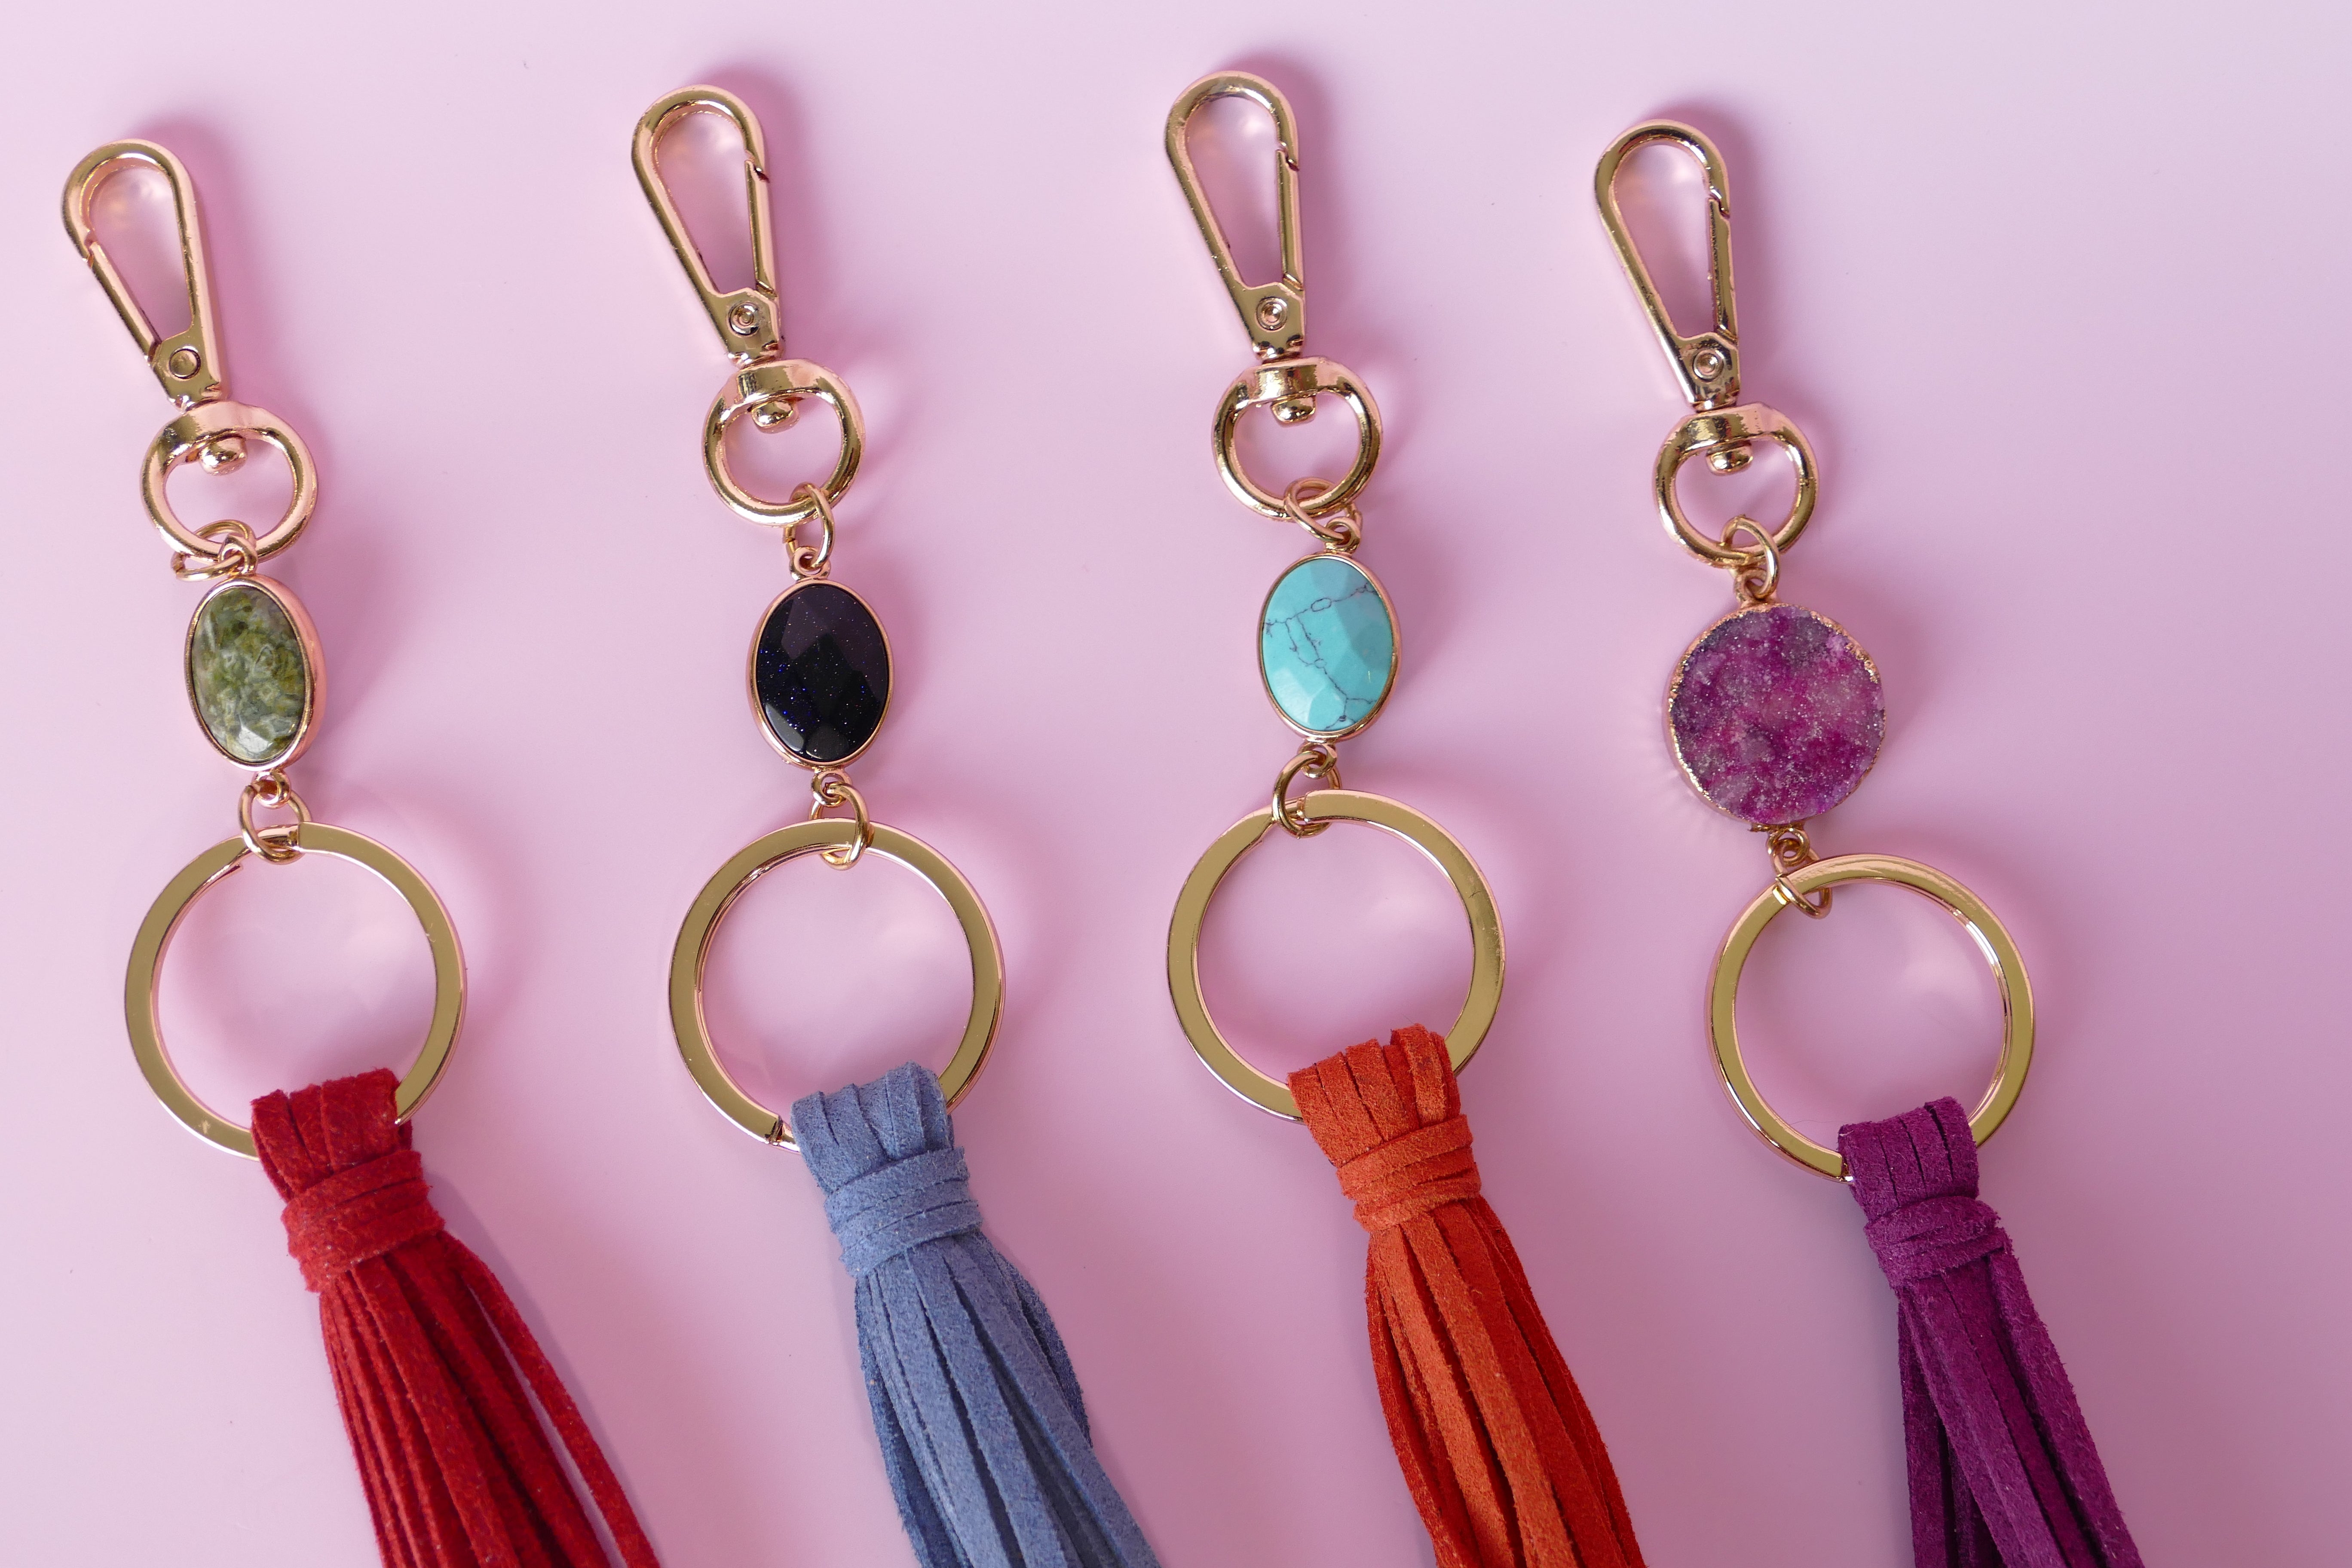 Colorful keychains